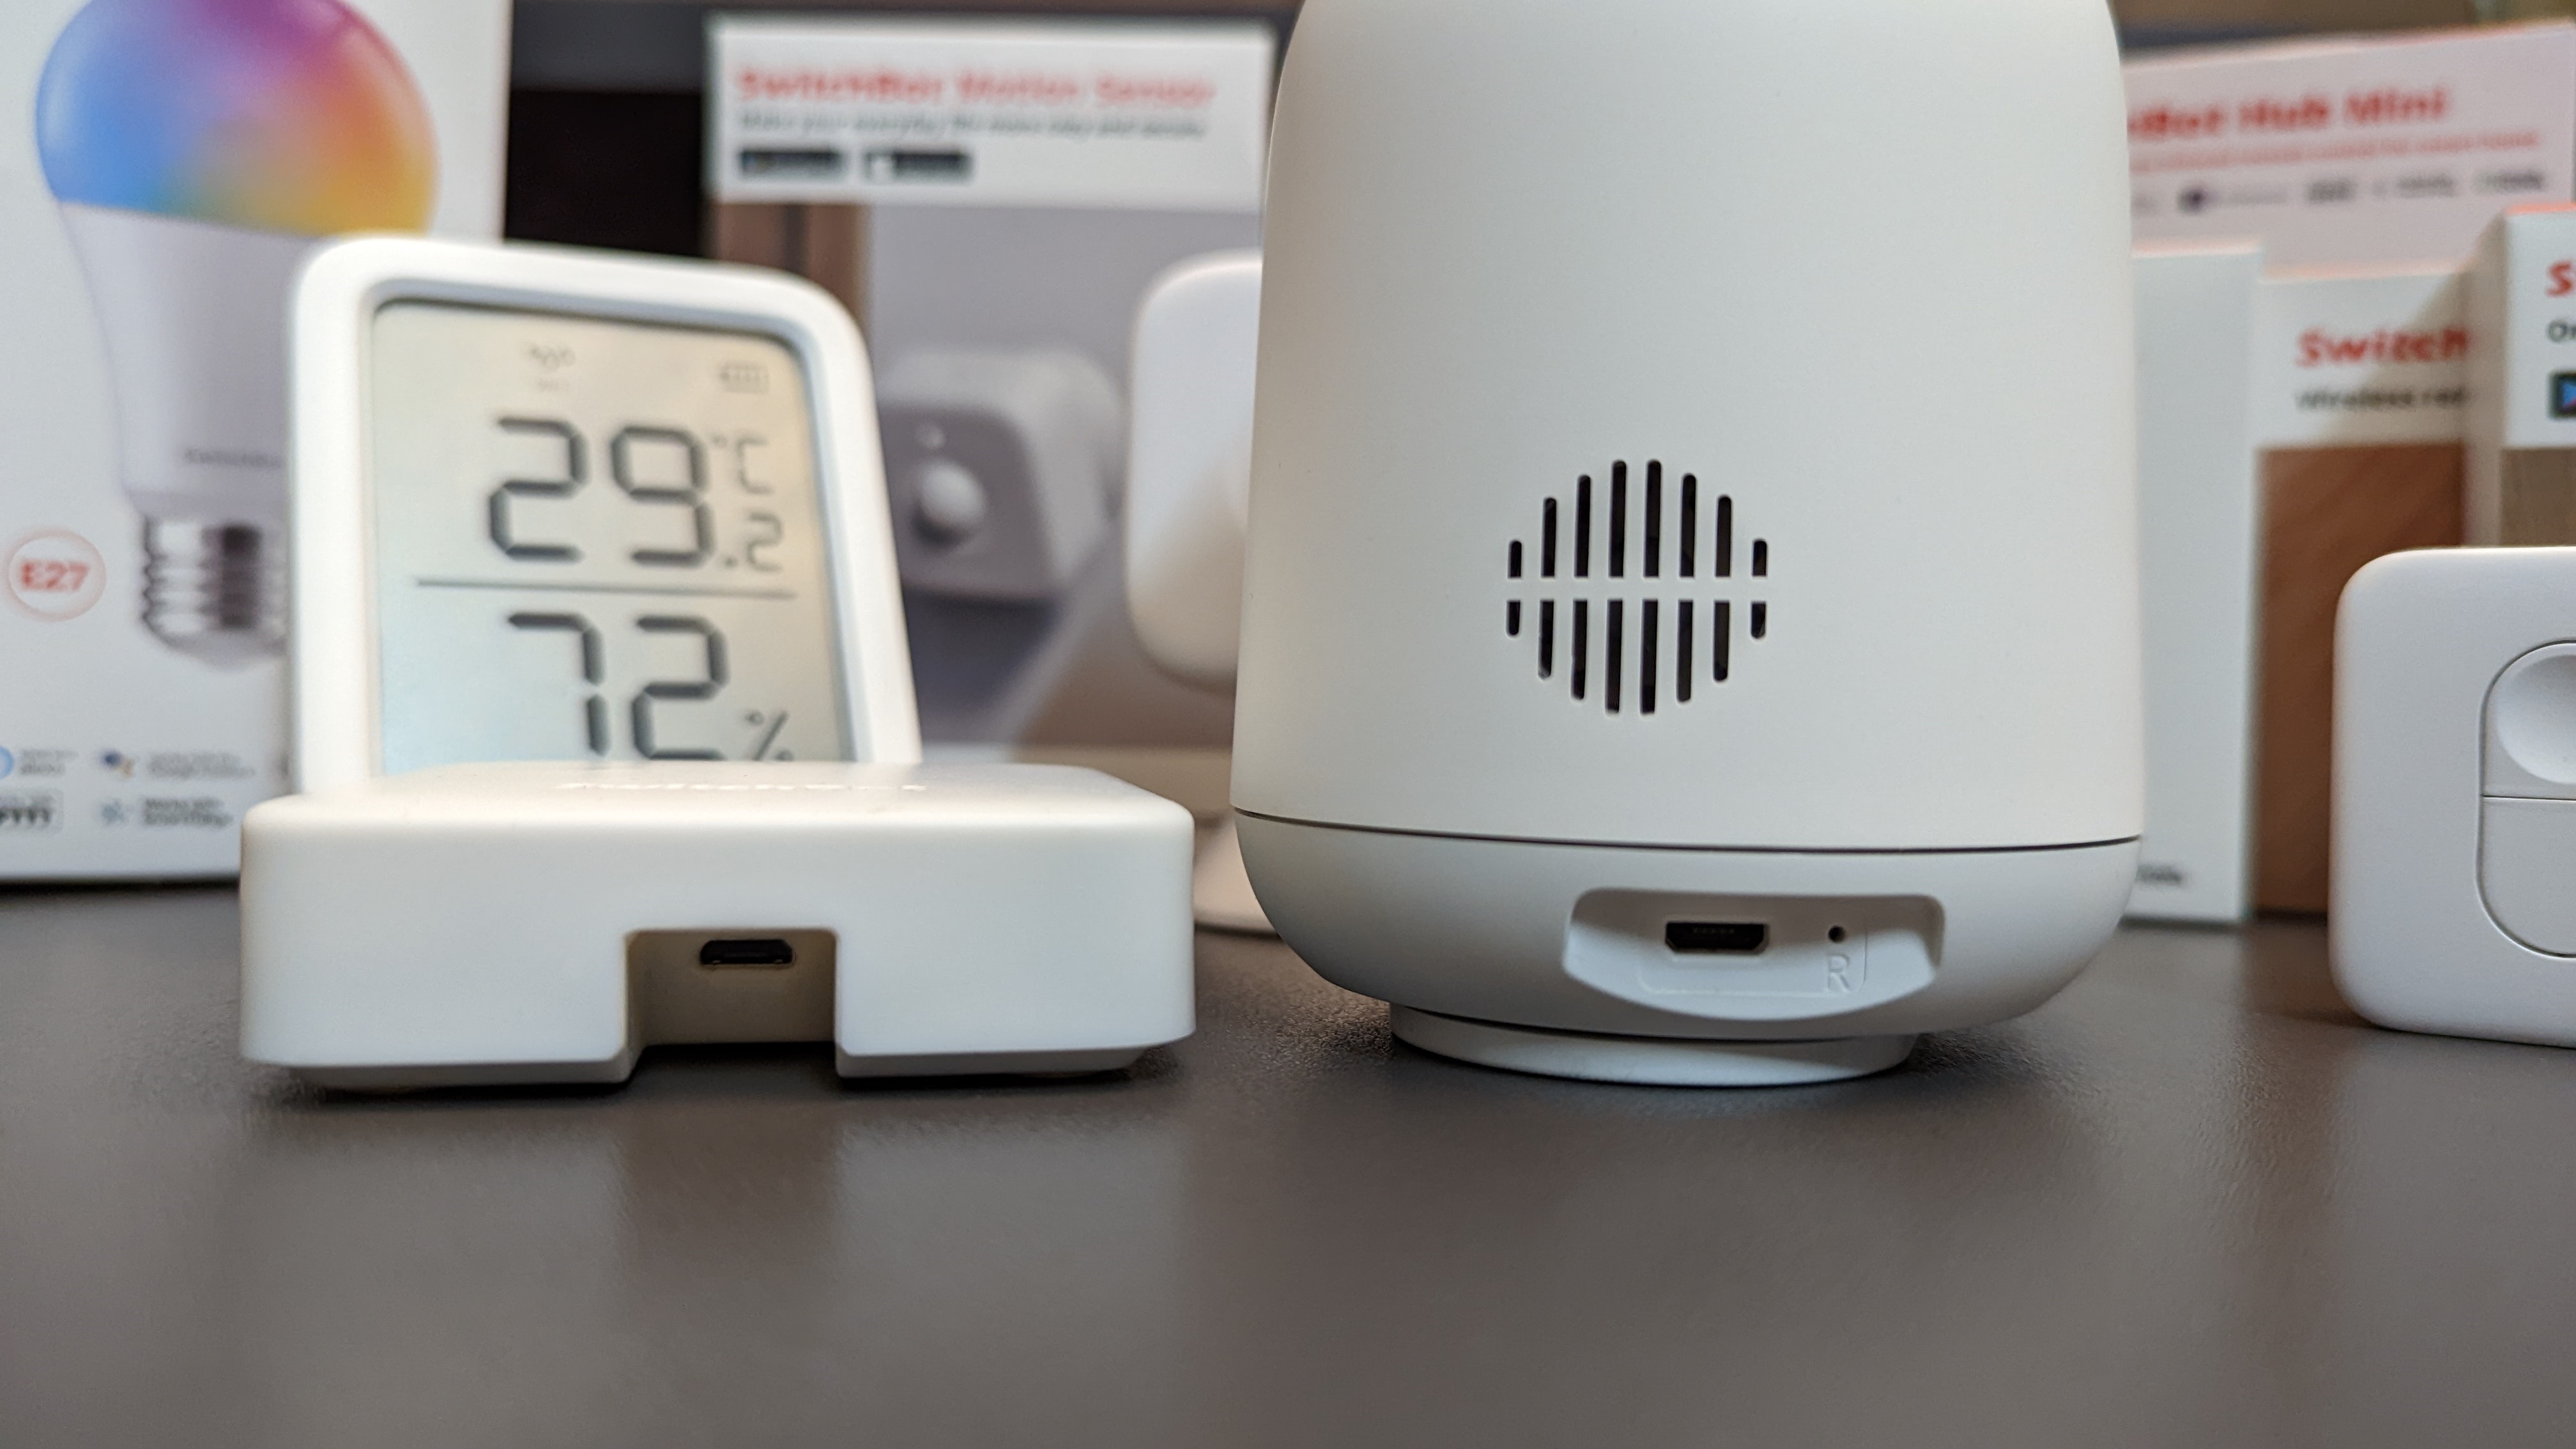 SwitchBot smart home products showcase their Micro USB ports